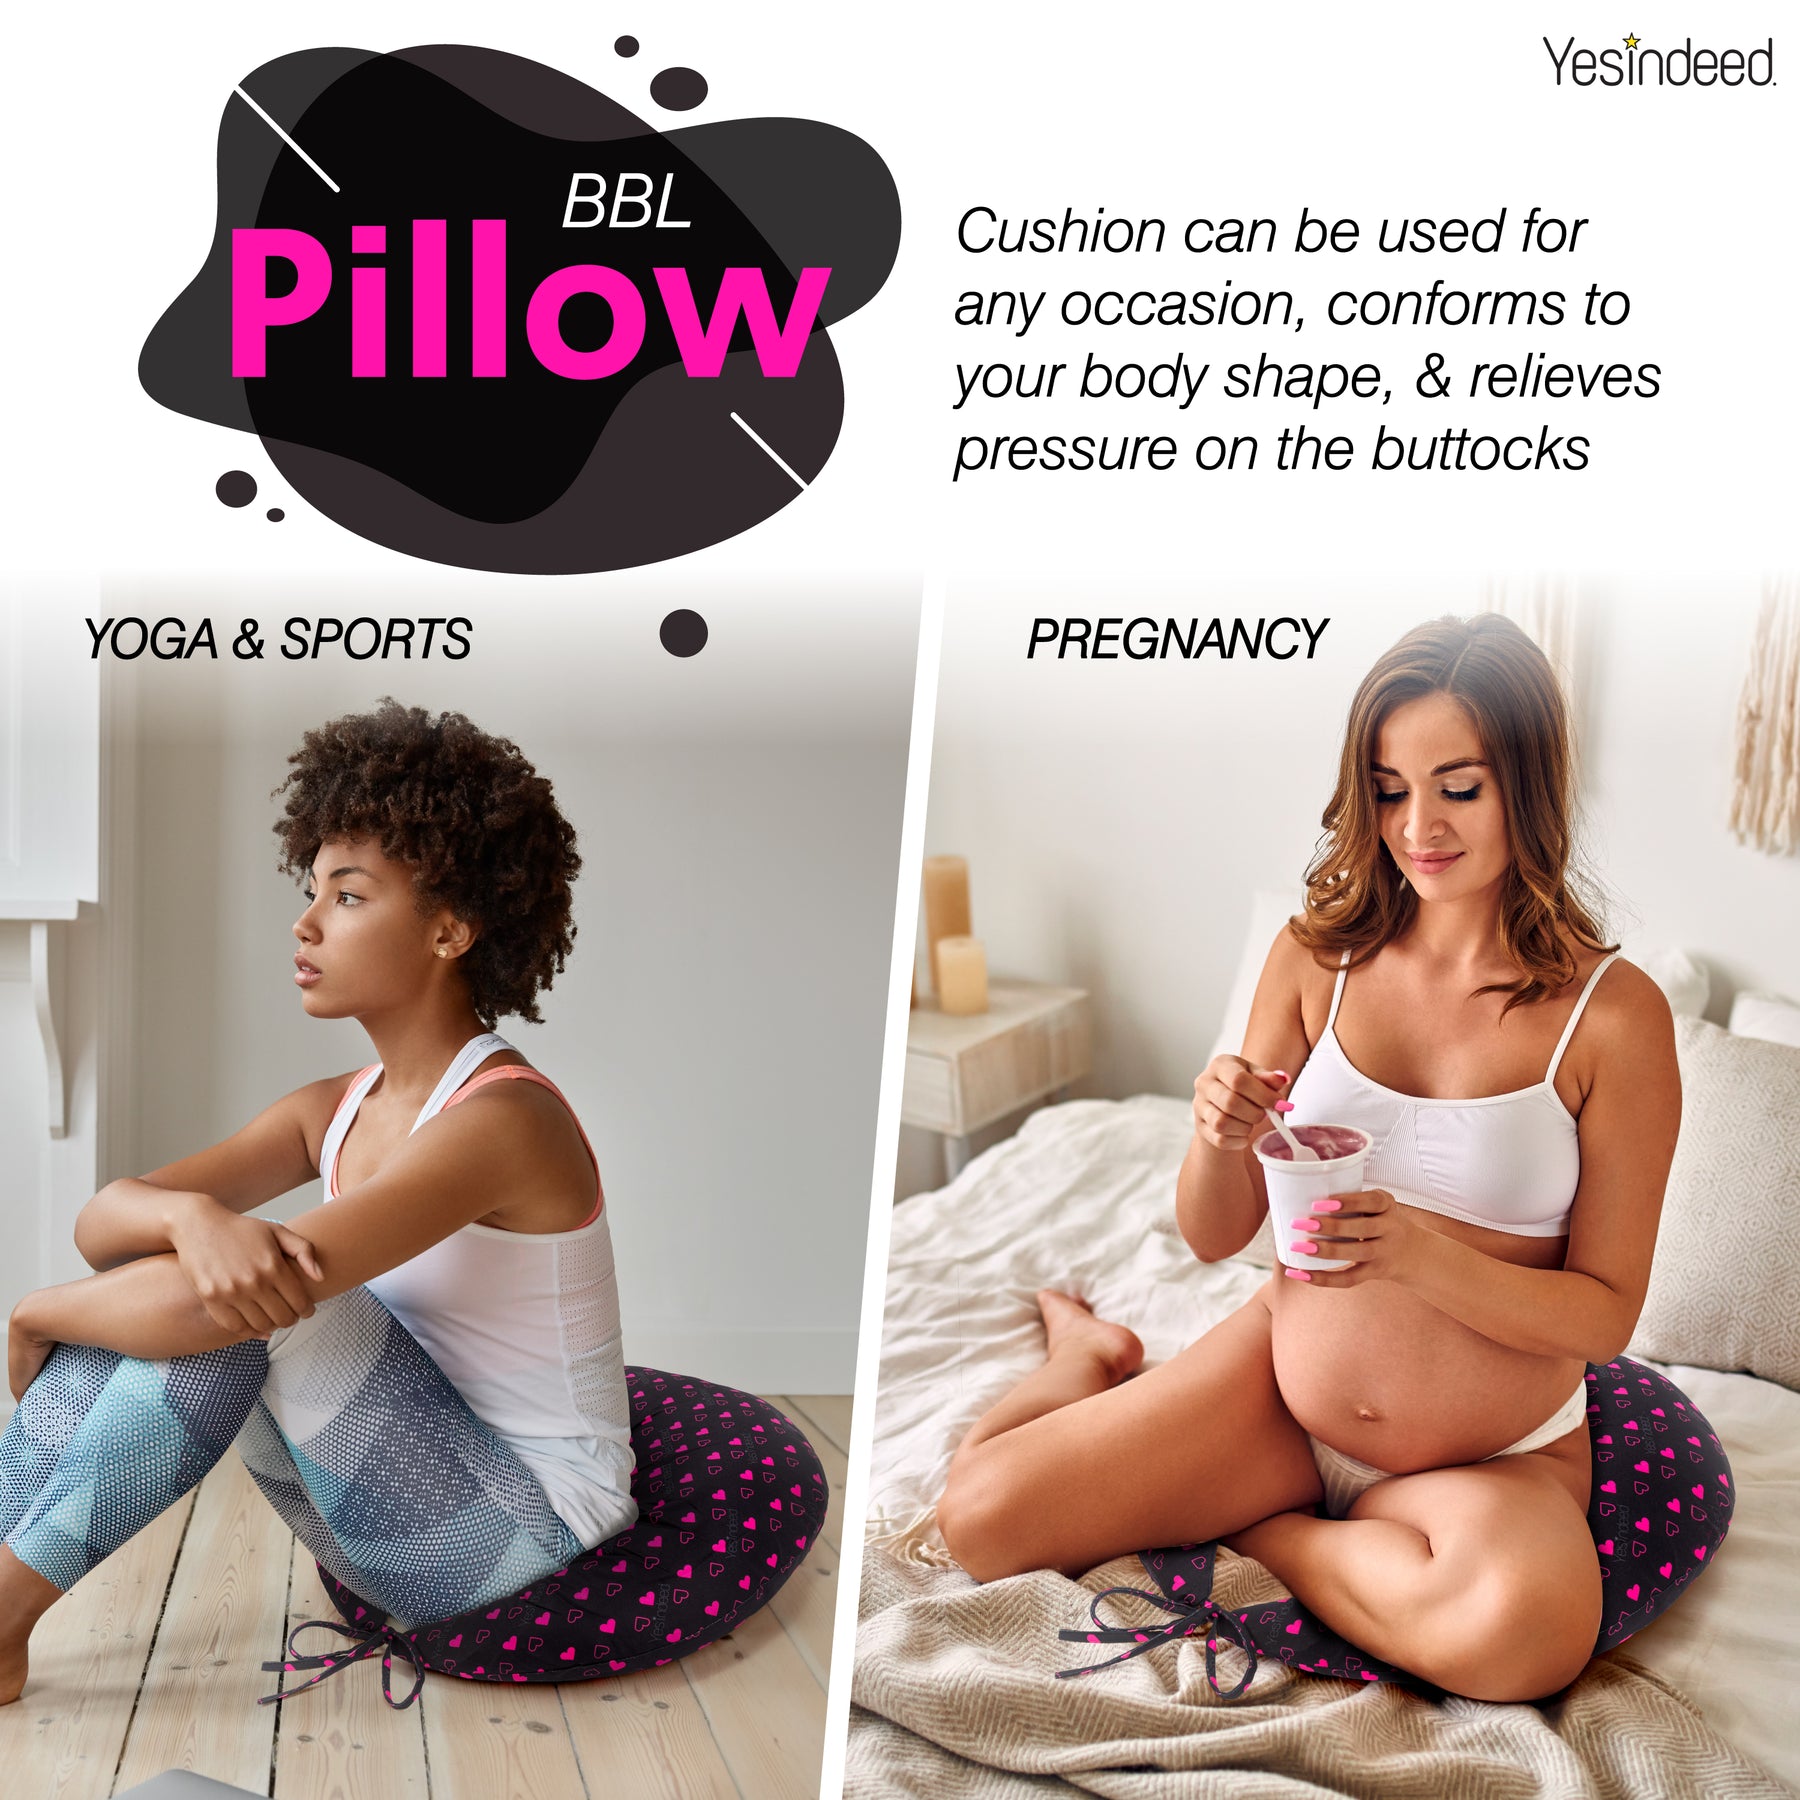 Recovery BBL pillow